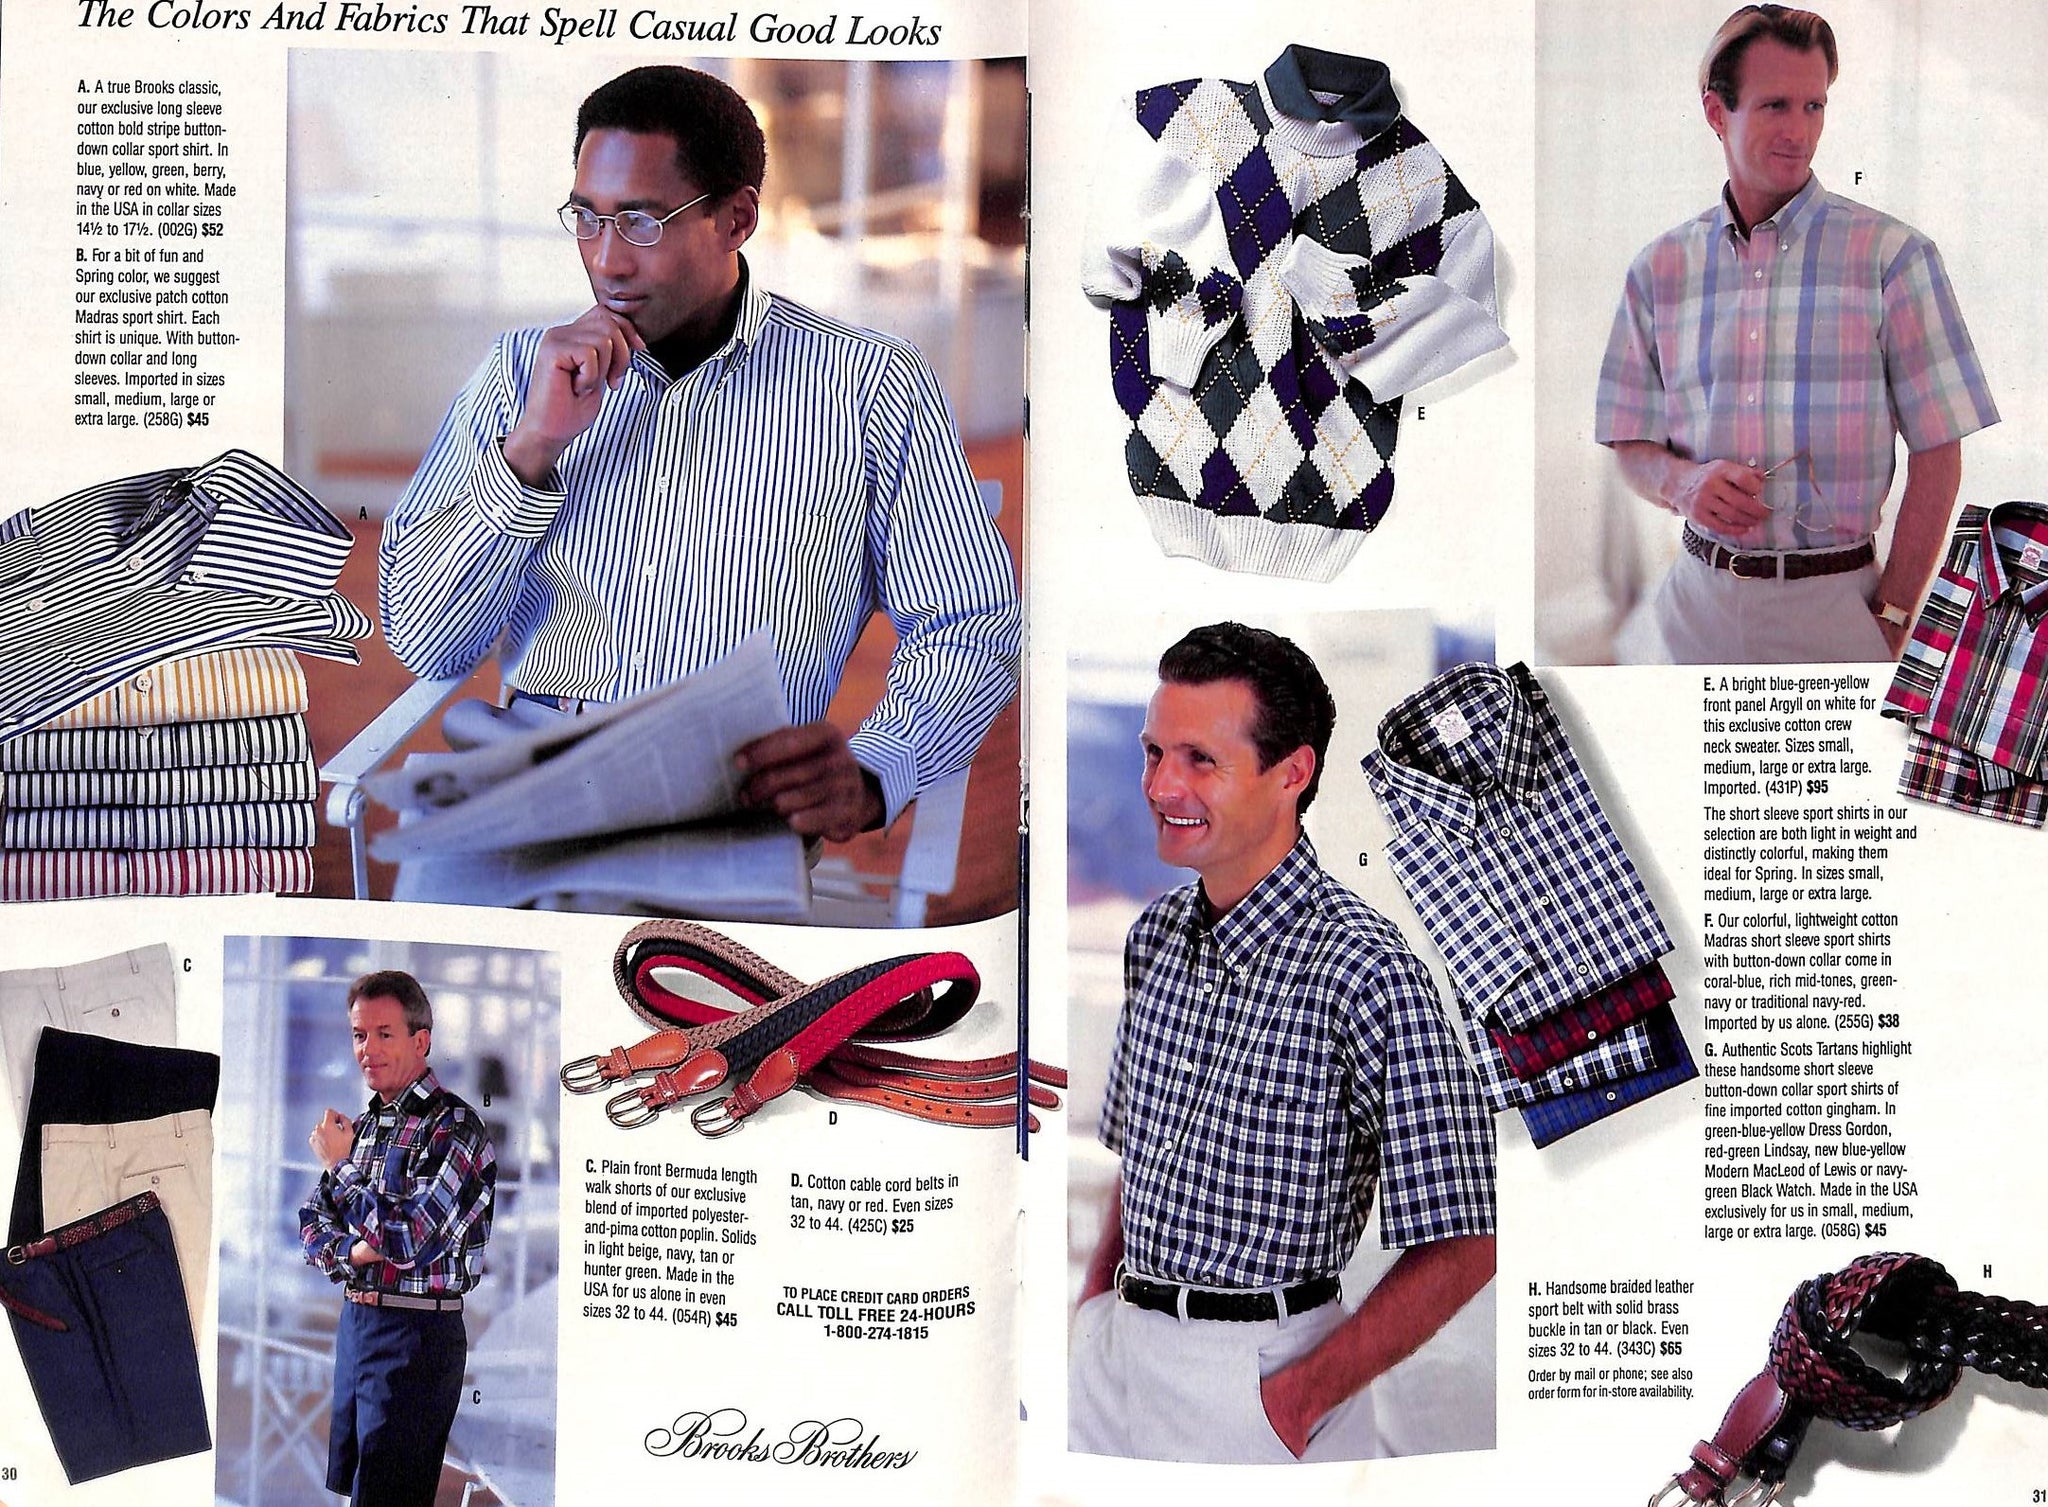 Brooks Brothers Spring 1991 Catalog (SOLD)